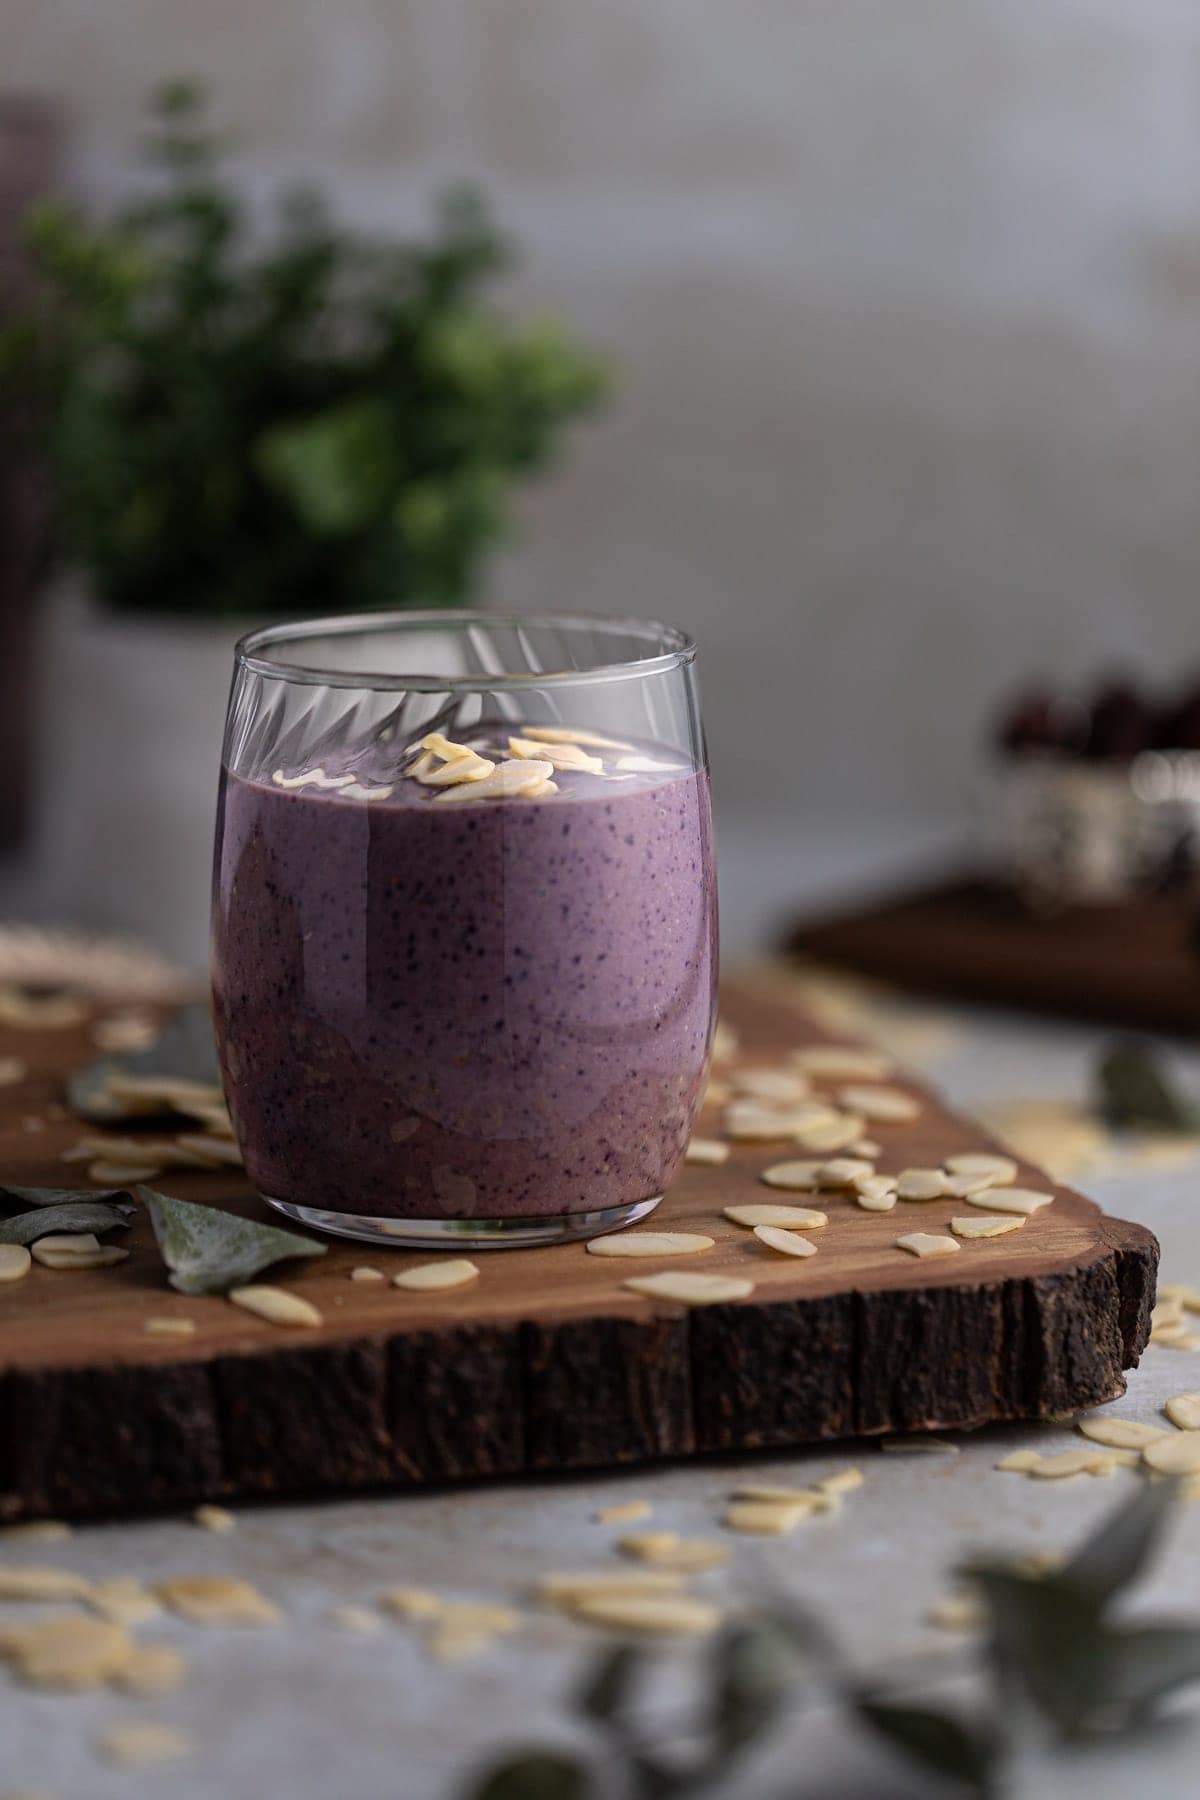 Up close view of a vegan blueberry tahini smoothie on a wooden board, with sliced almonds scattered on the table.